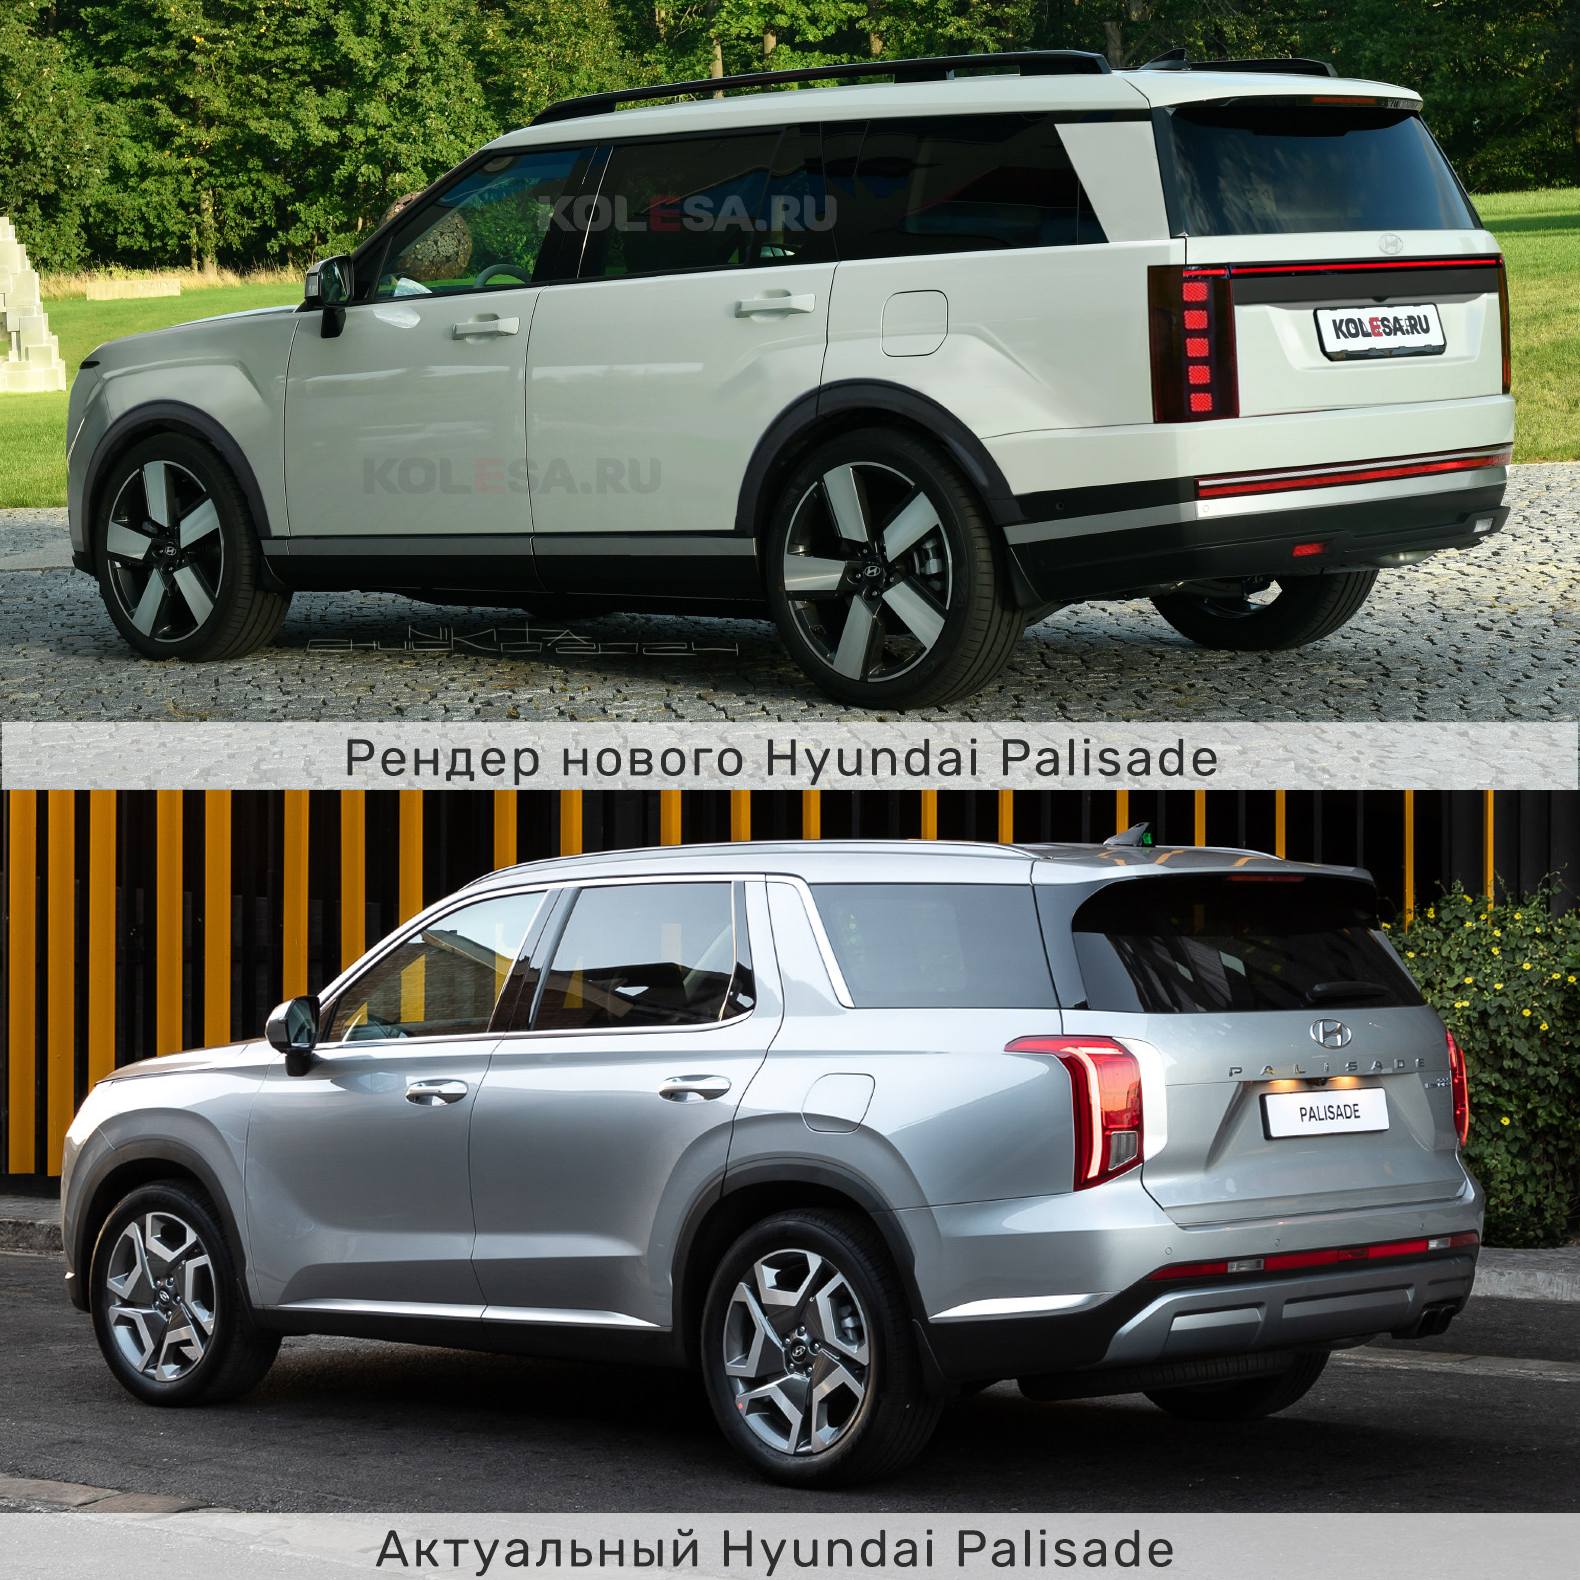 2026-hyundai-palisade-mid-size-cuv-debuts-across-fantasy-land-with-pixelated-styling_1.jpg